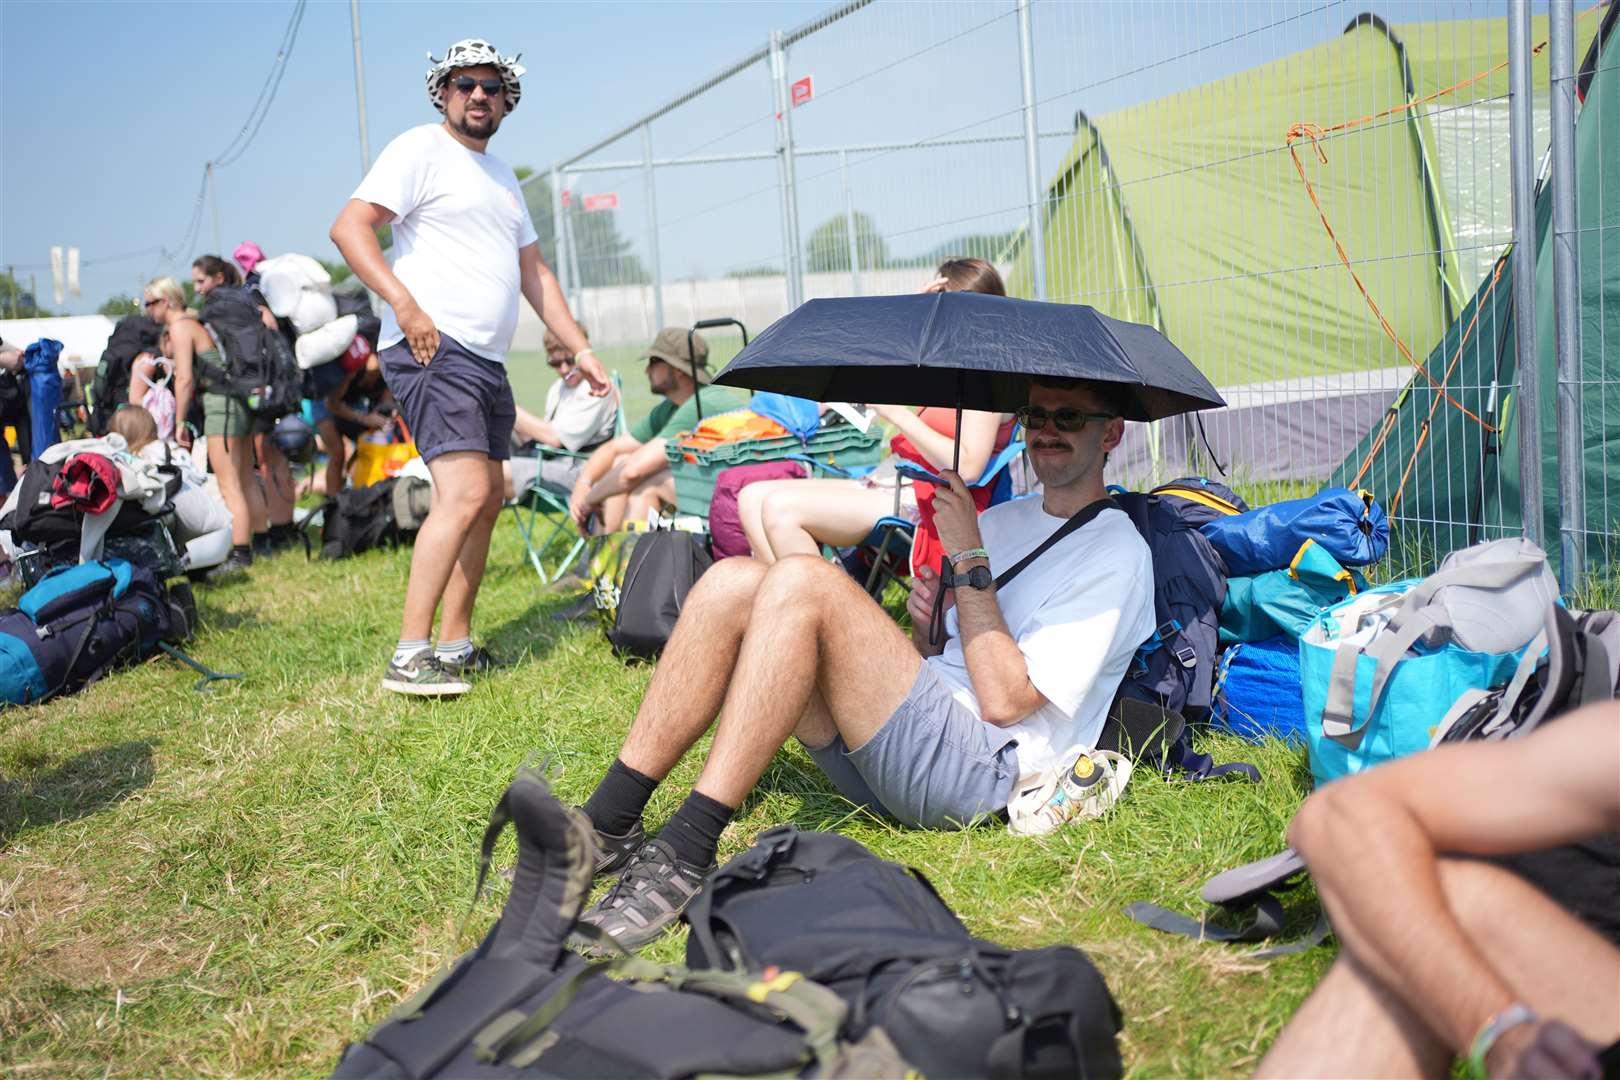 Some Worthy Farm festivalgoers improvised with umbrellas to shield them from the sun (Yui Mok/PA)